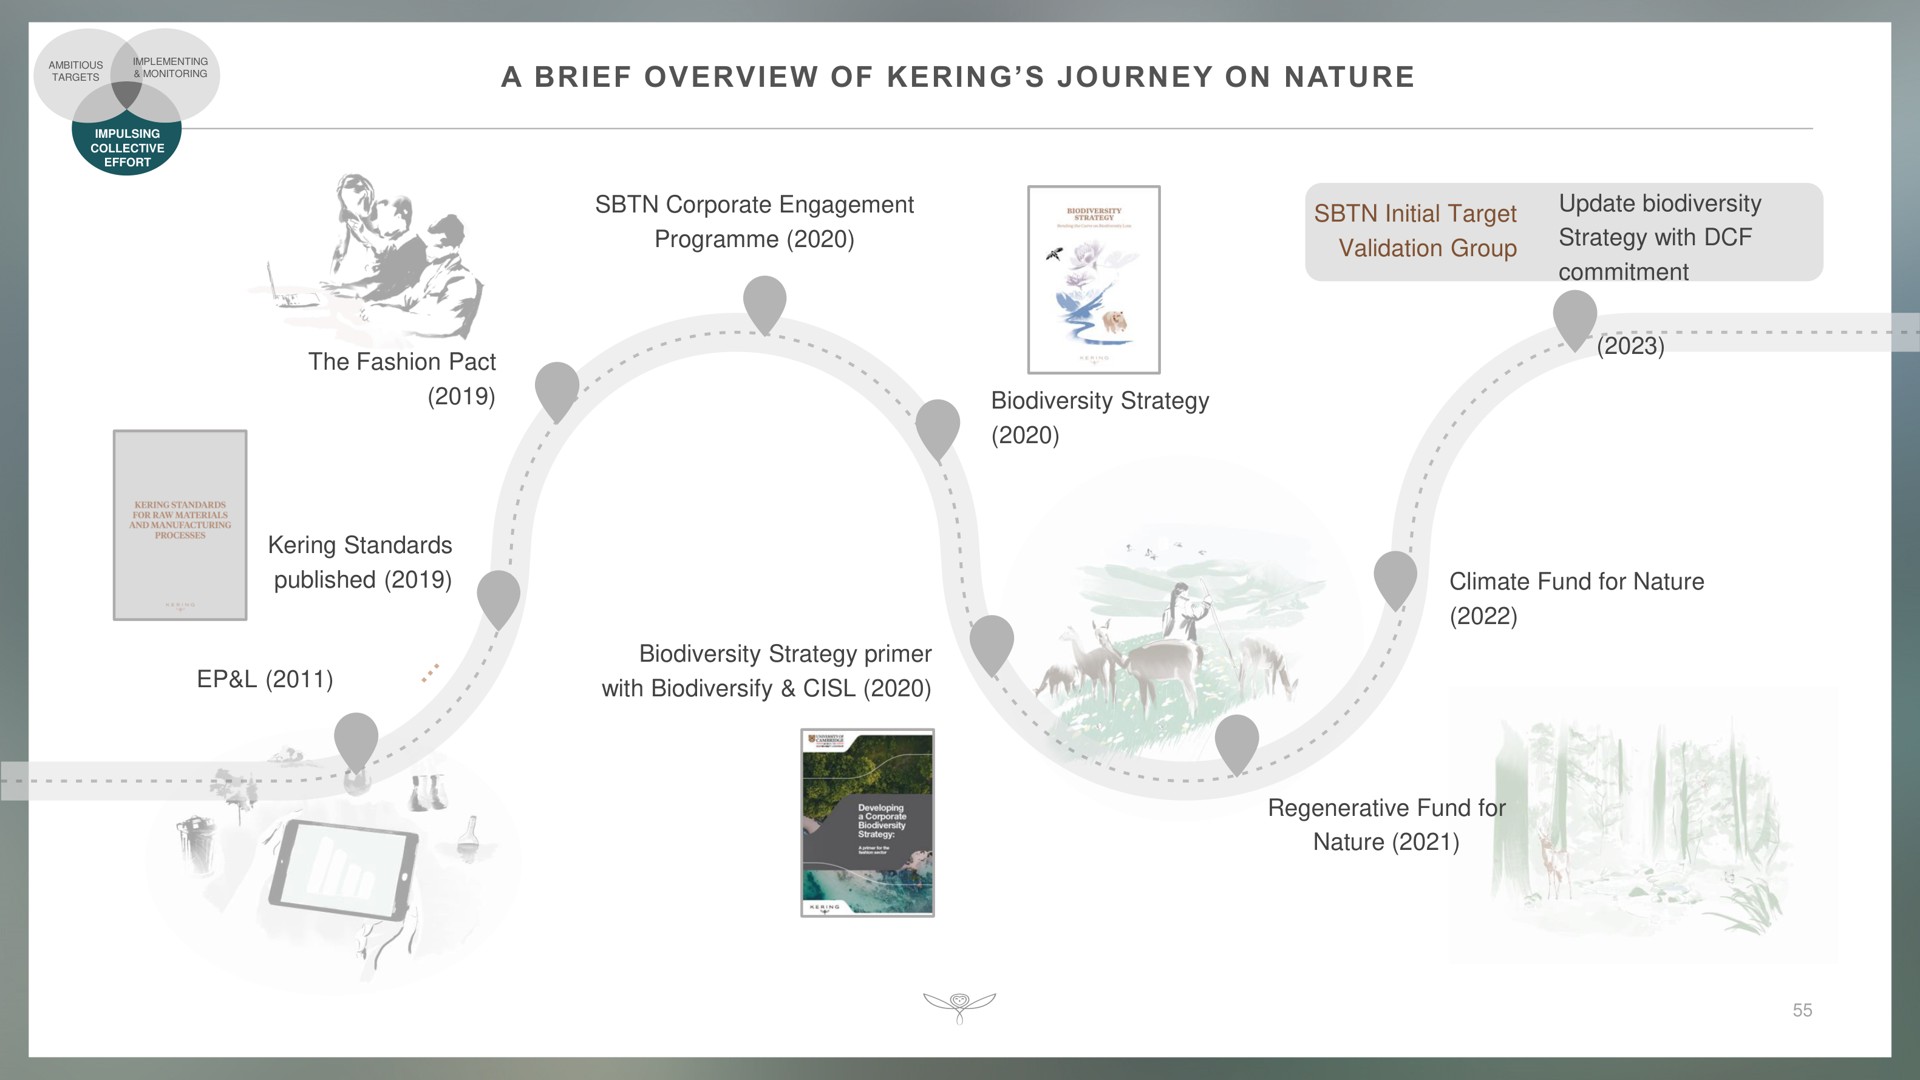 a brief overview of journey on nature corporate engagement initial target validation group update strategy with commitment strategy the fashion pact standards published strategy primer with climate fund for nature regenerative fund for nature targets oven | Kering